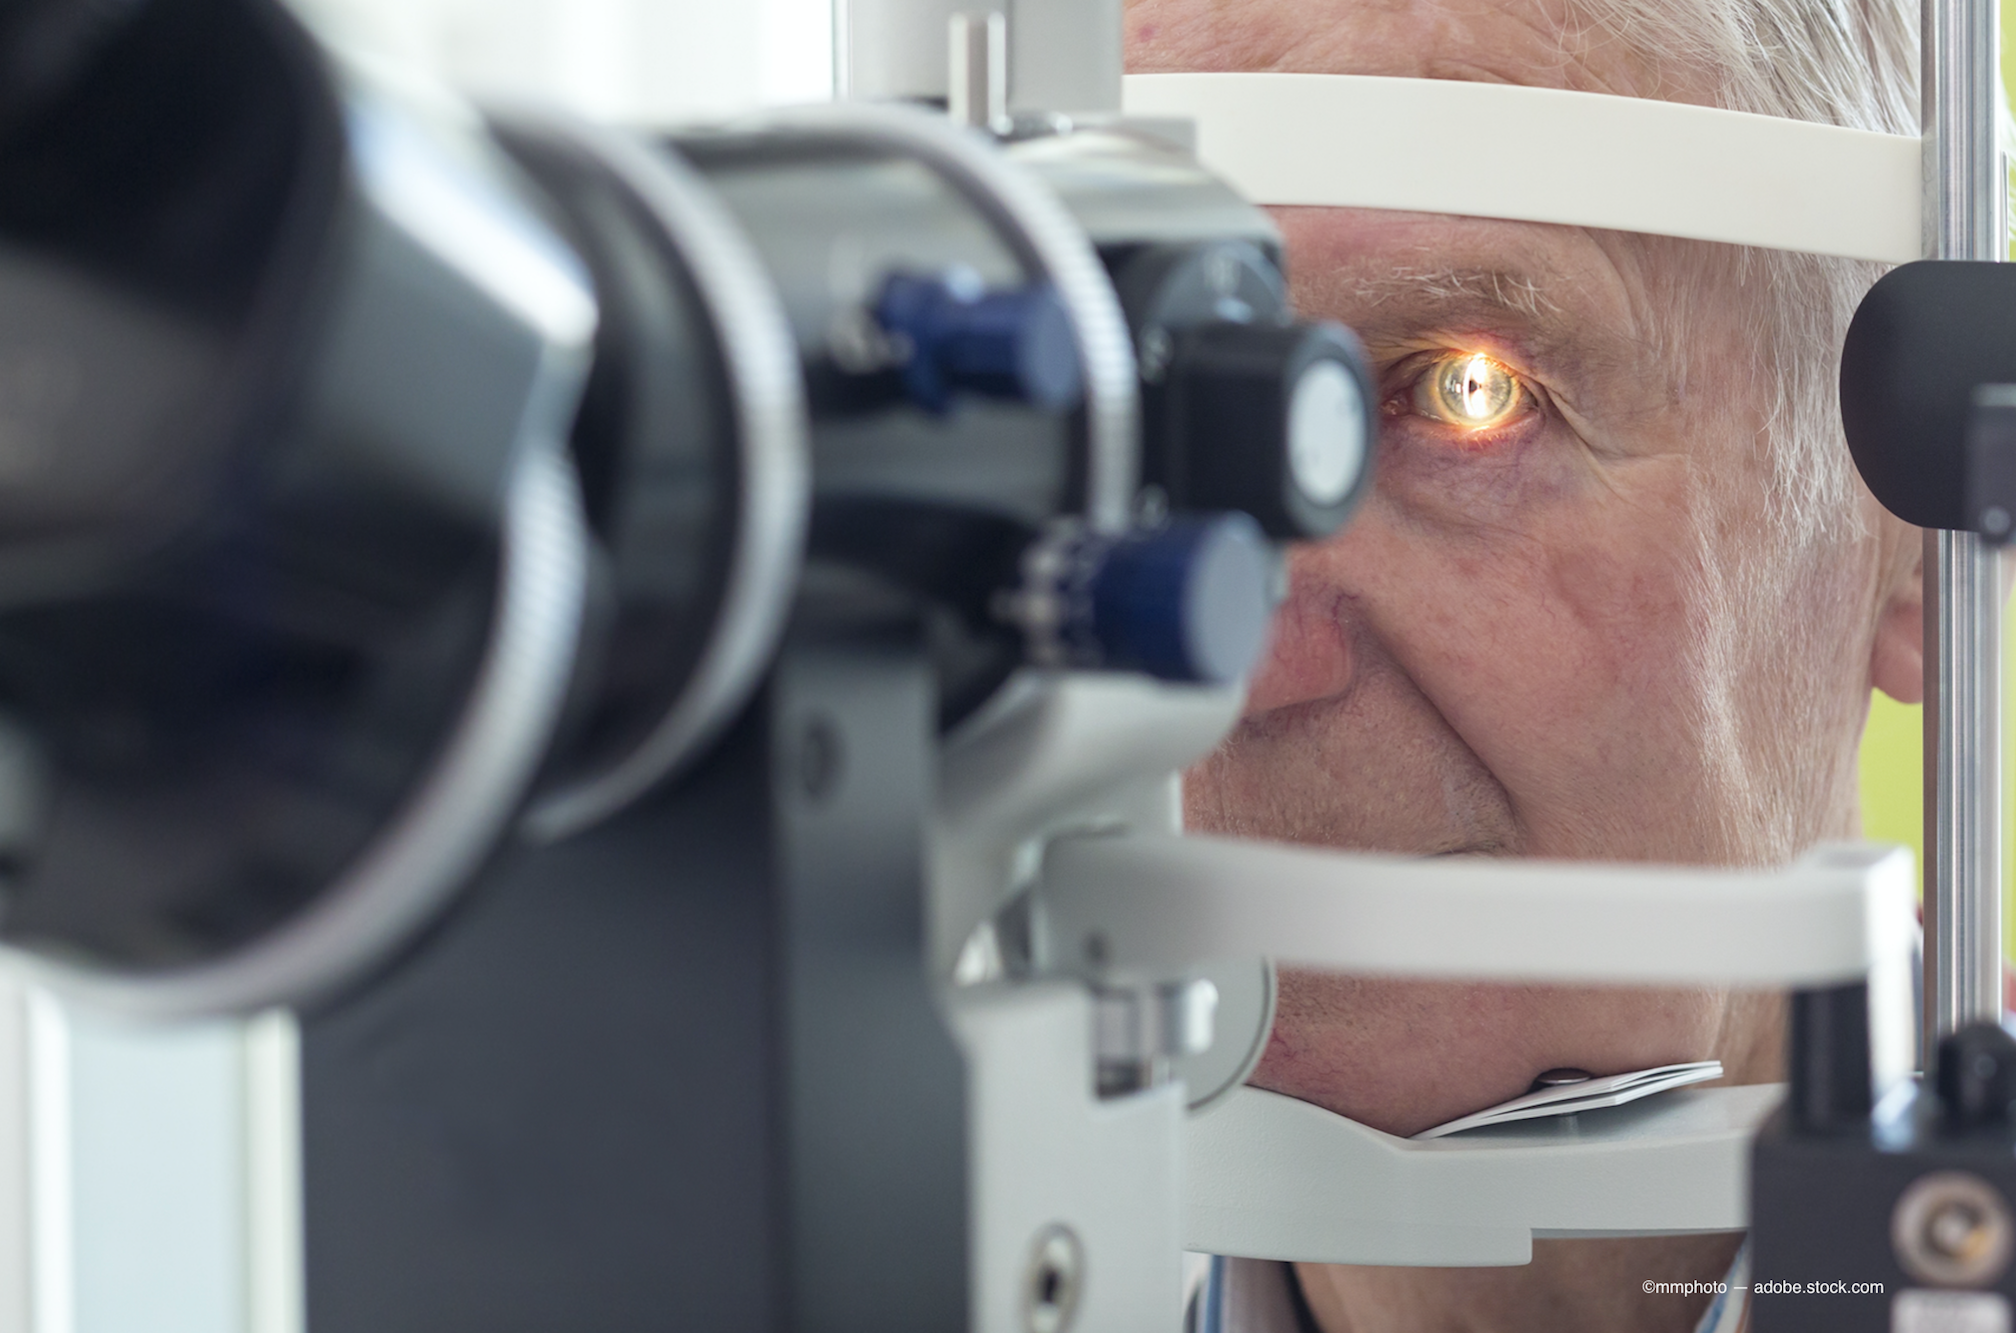 5 steps to manage cataract patient expectations